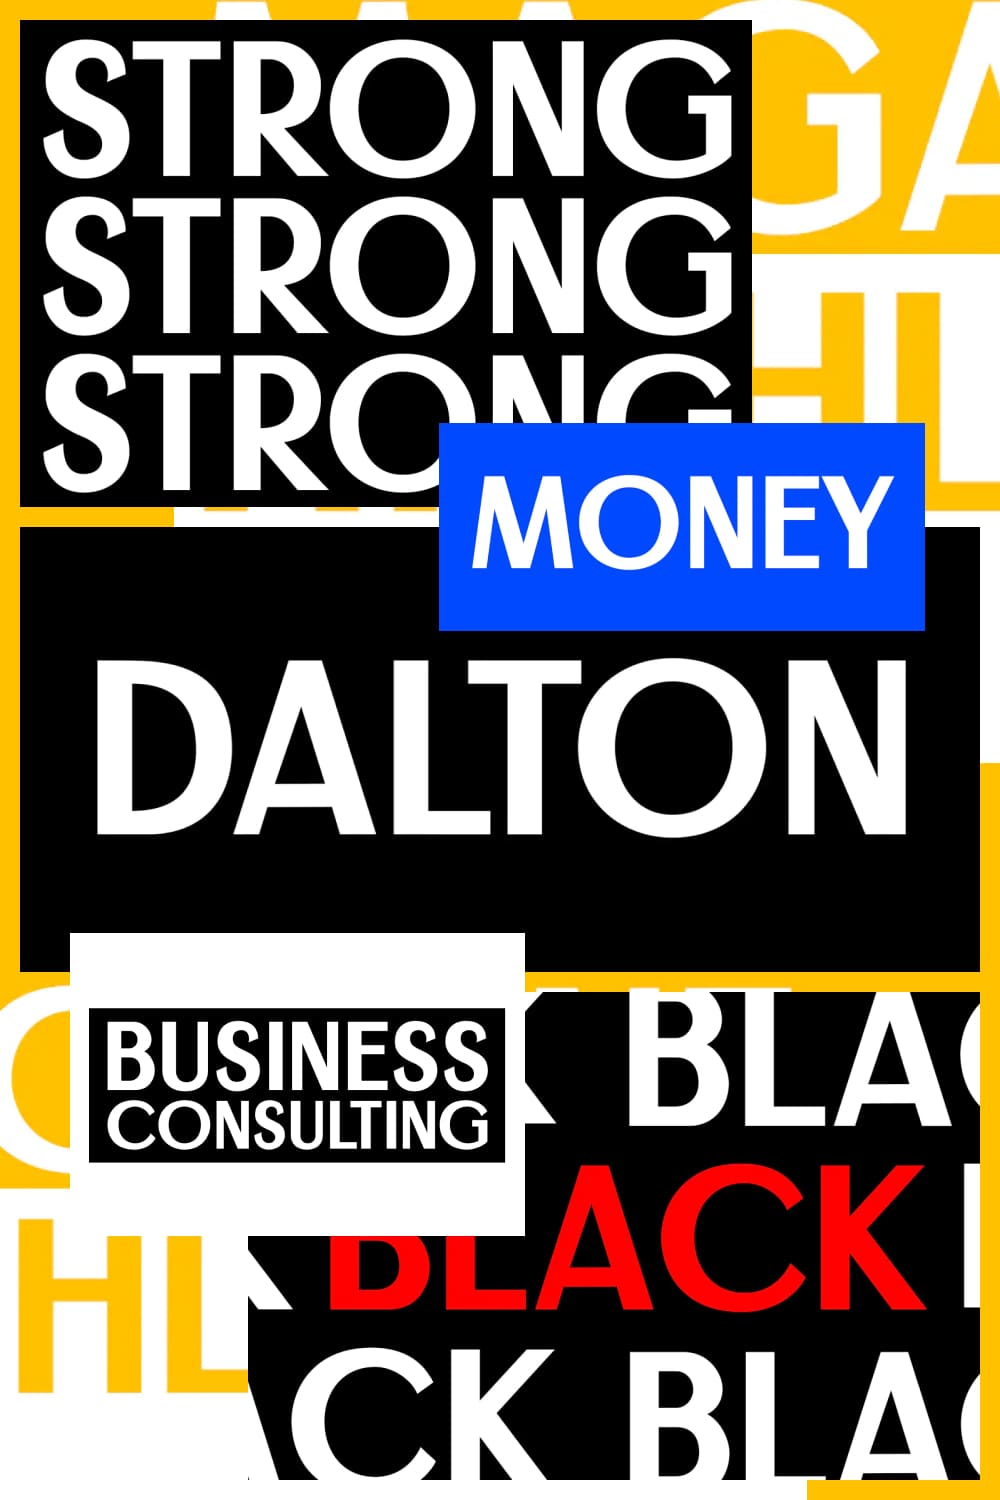 This is a professional business font. It is ideal for business purposes.